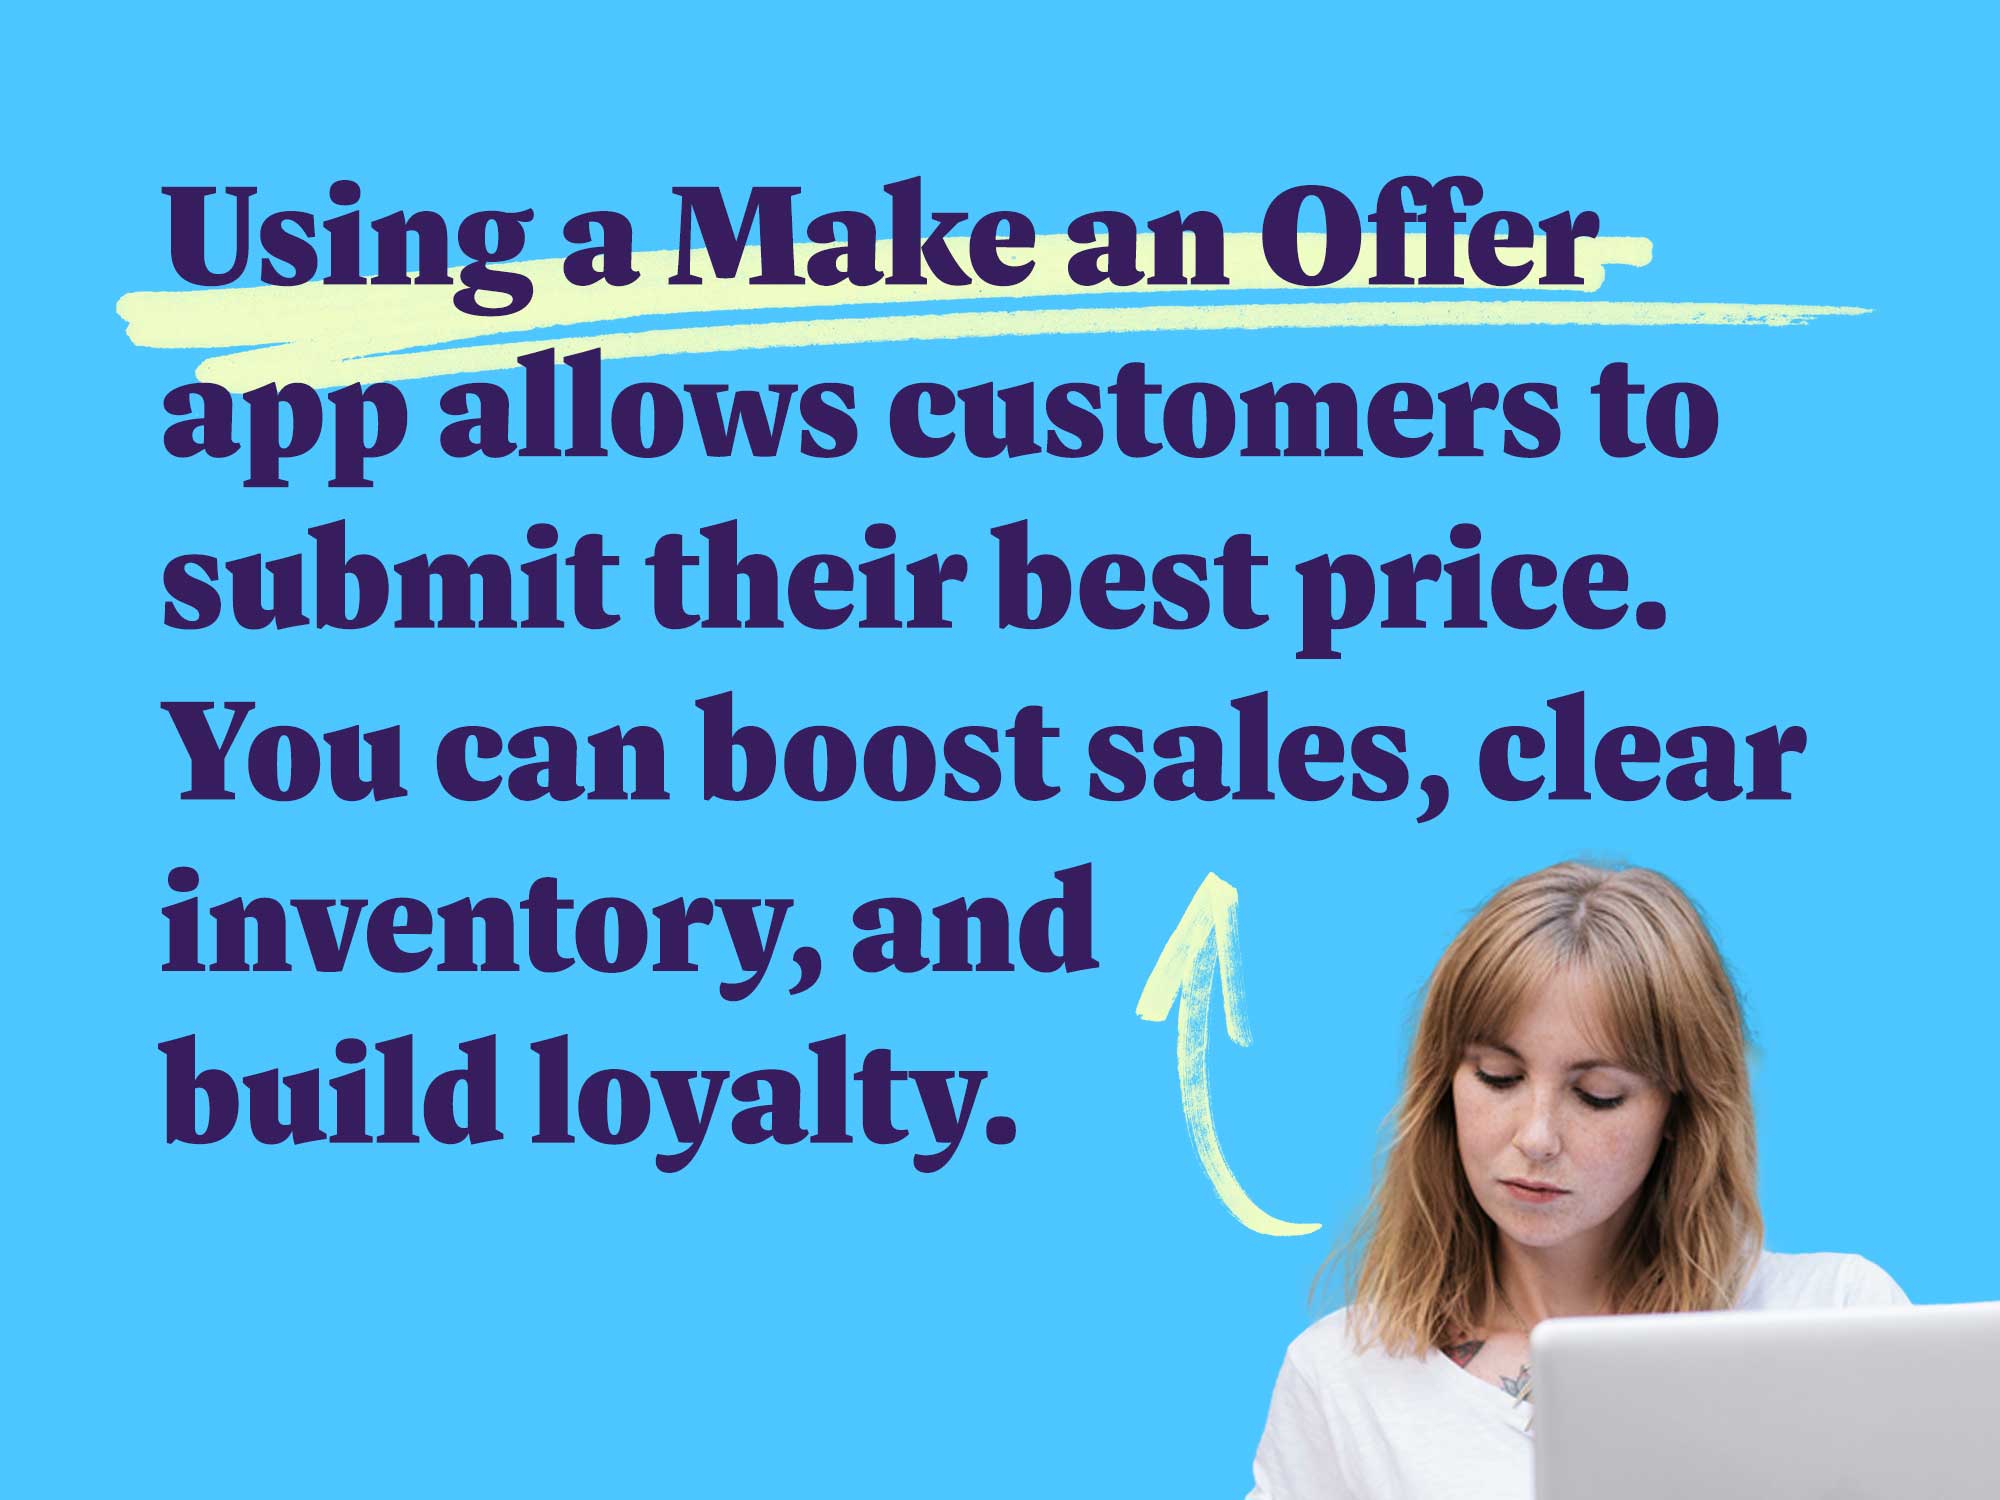 Using a Make an Offer app allows customers to submit their best price. You can boost sales, clear inventory, and build loyalty.